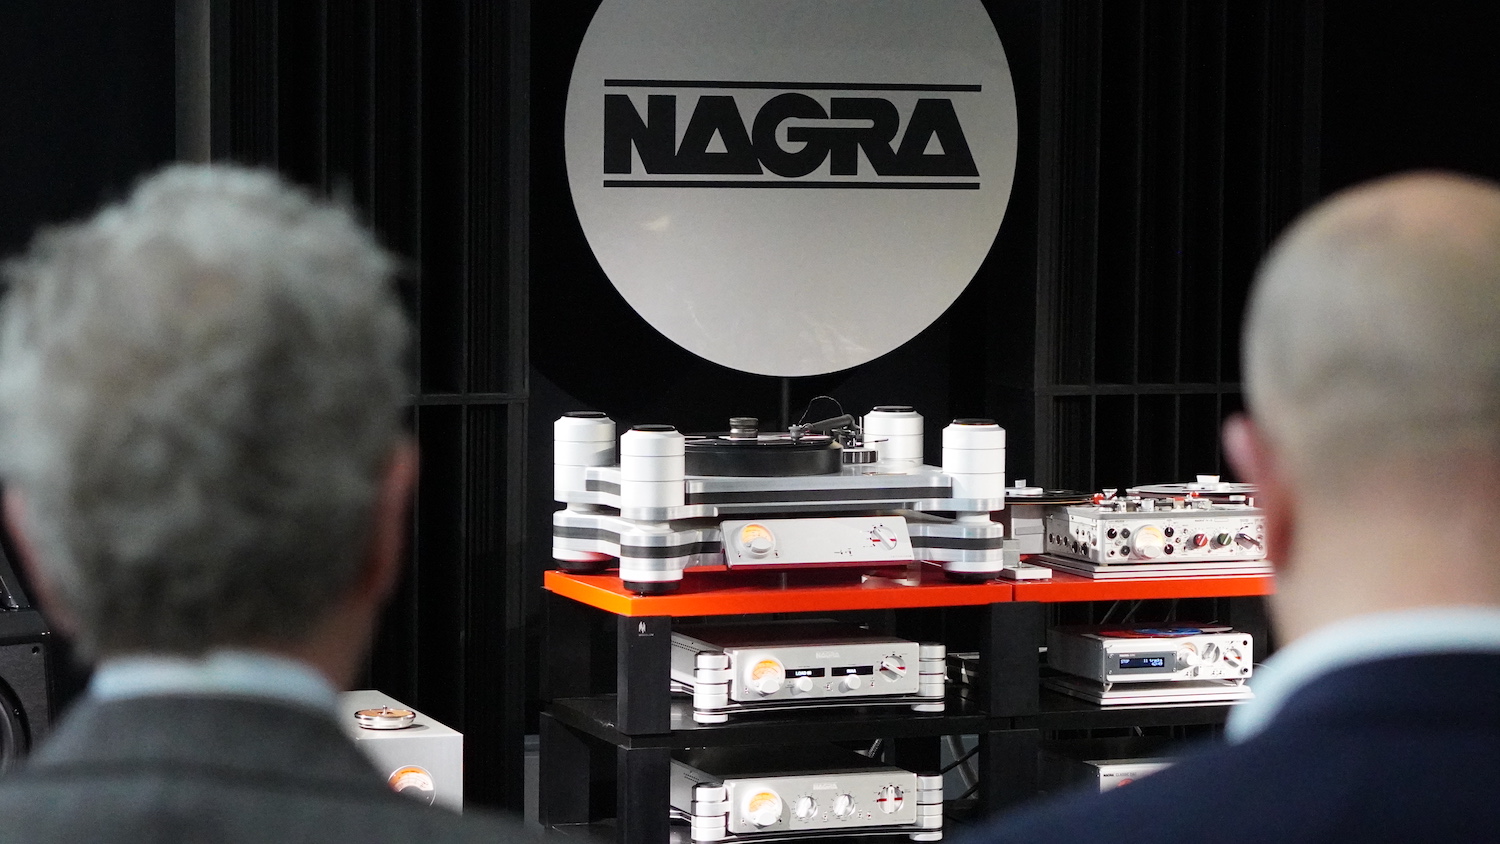 Nagra at High End 2023